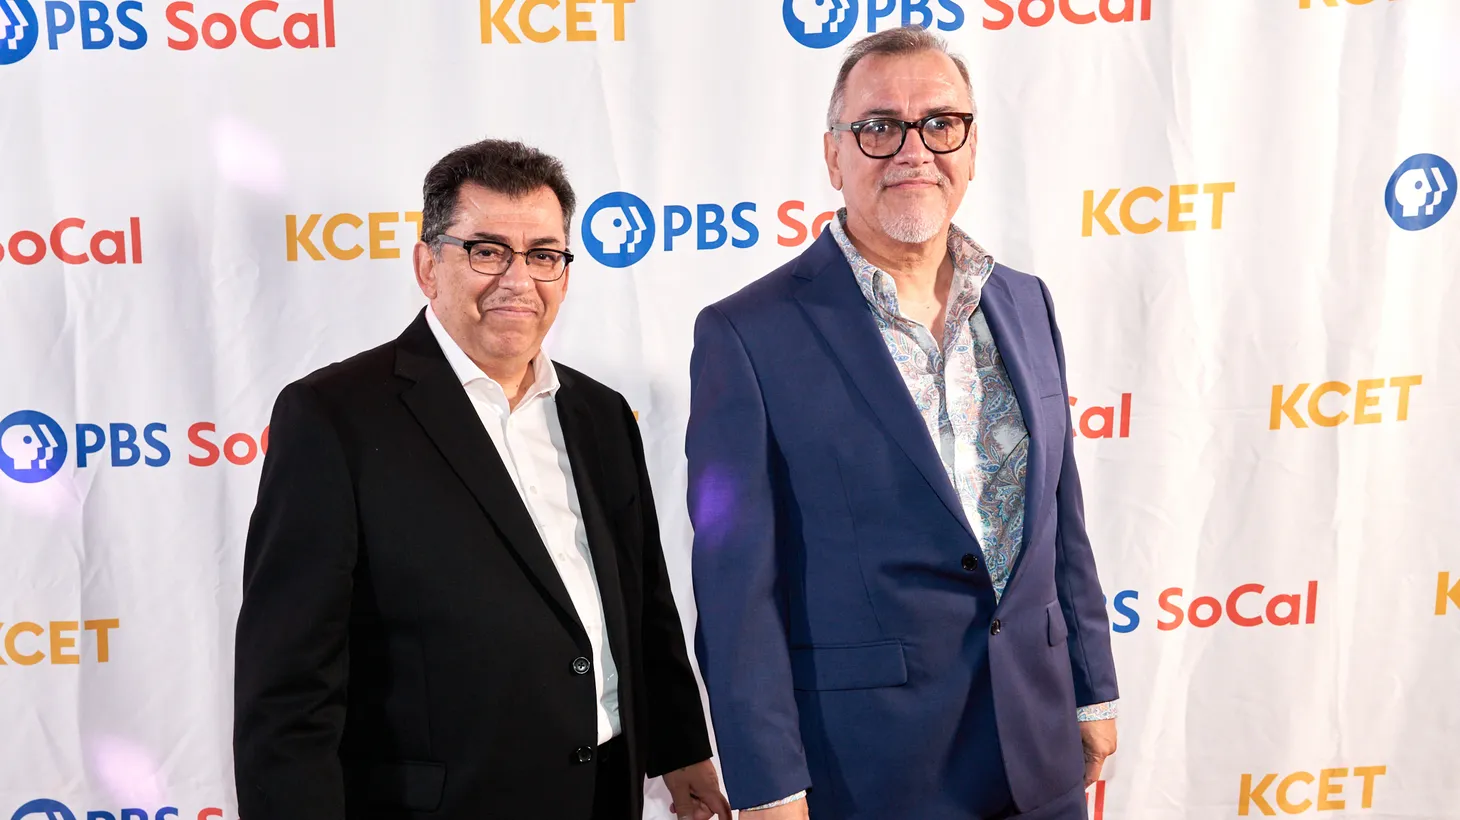 Cartoonists Jaime (left) and Gilbert Hernandez at the KCET/PBS SoCal screening of the “Love and Rockets” documentary.